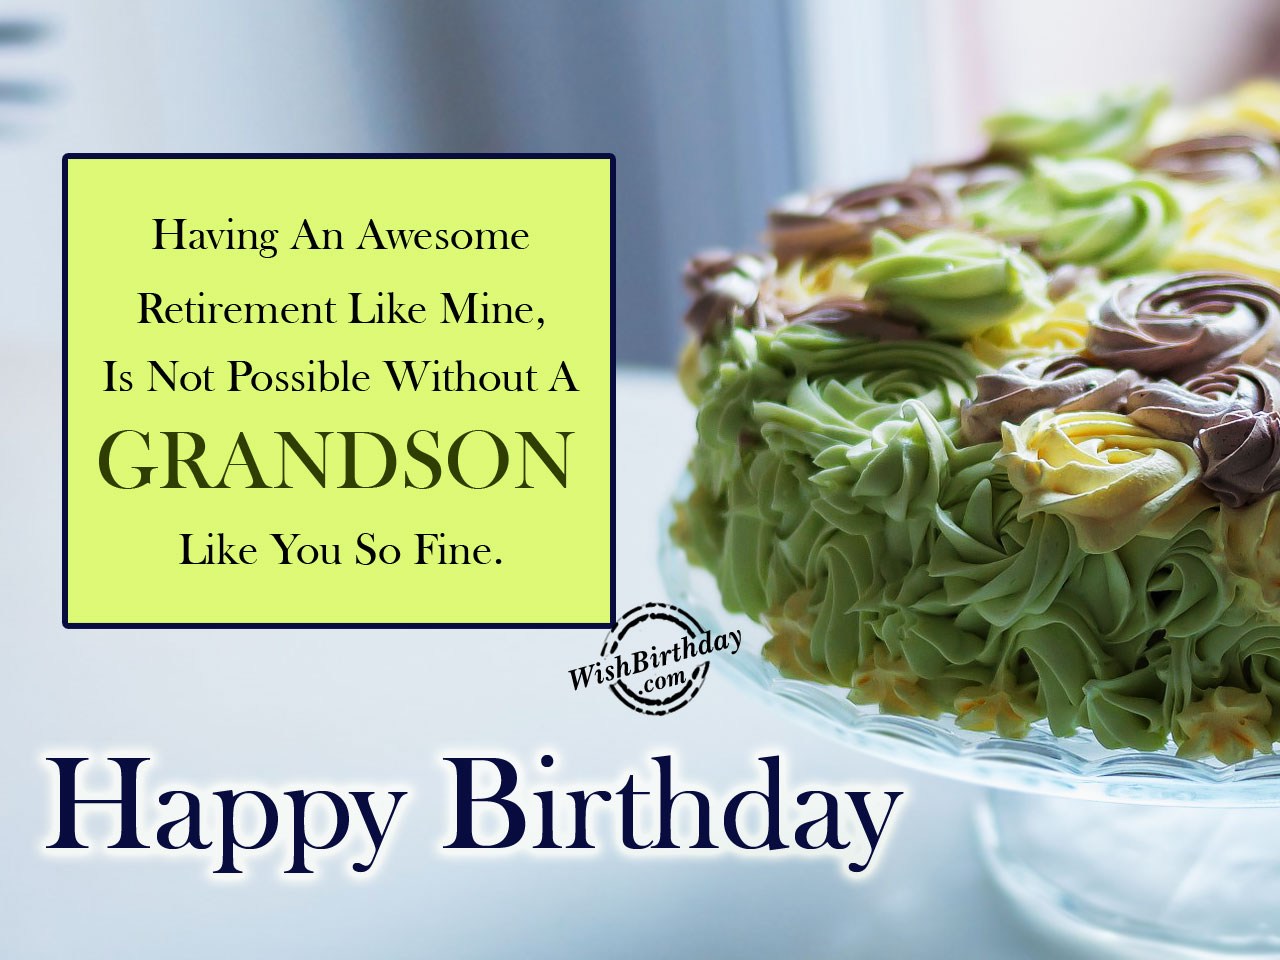 birthday-wishes-for-grandson-birthday-wishes-happy-birthday-pictures